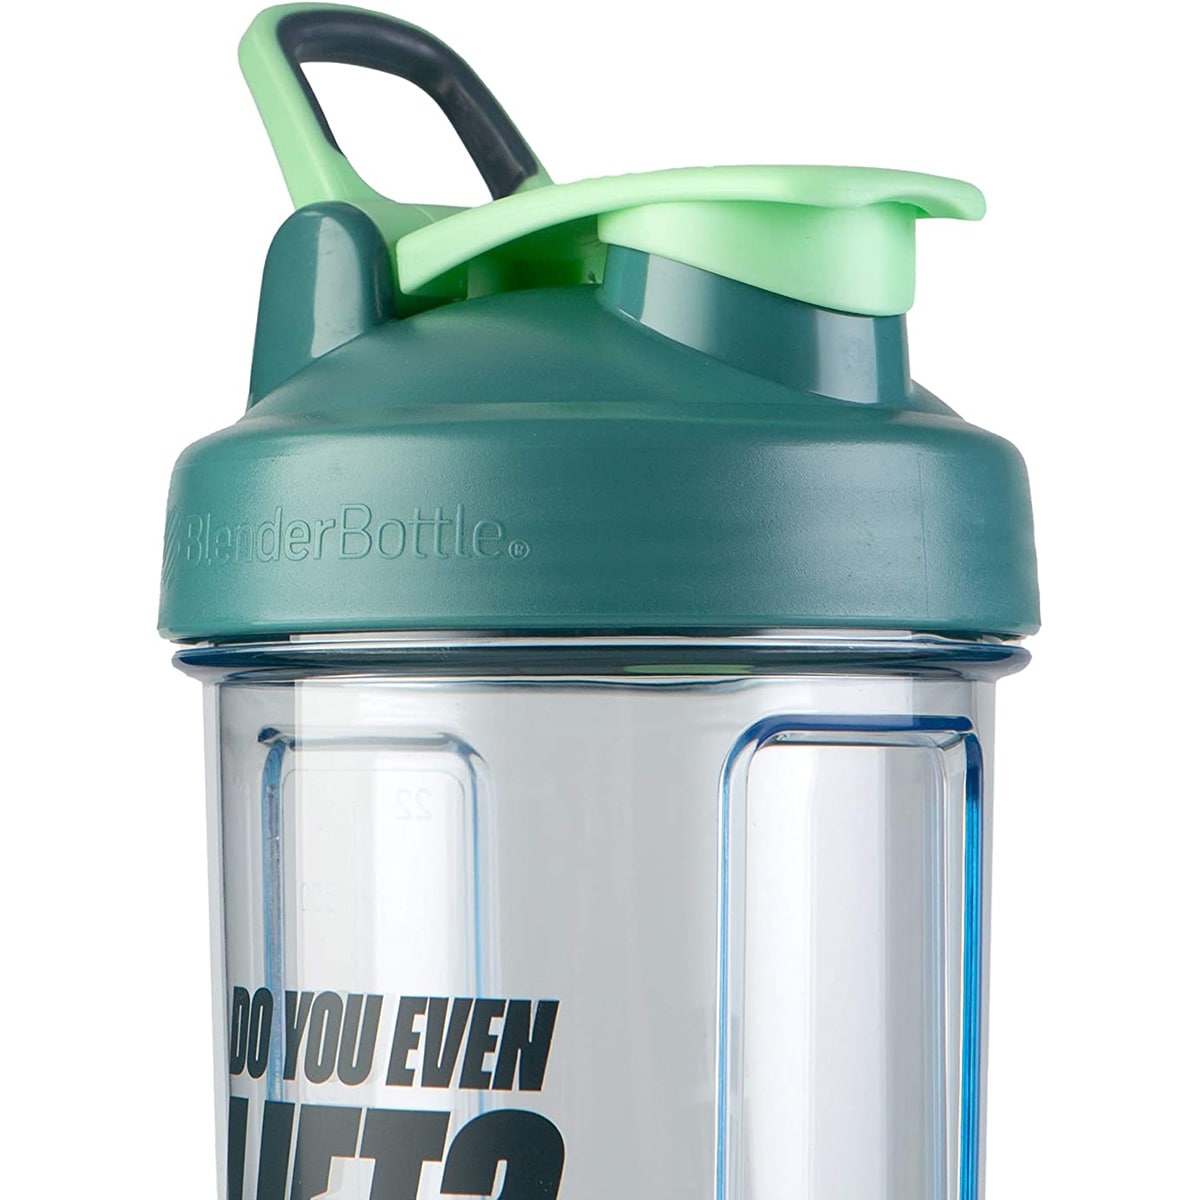 https://ak1.ostkcdn.com/images/products/is/images/direct/22b339ec25279a93e9363ceaf6aceae1b81033d1/Blender-Bottle-The-Mandalorian-Pro-Series-28-oz.-Shaker-Mixer-Cup-with-Loop-Top.jpg